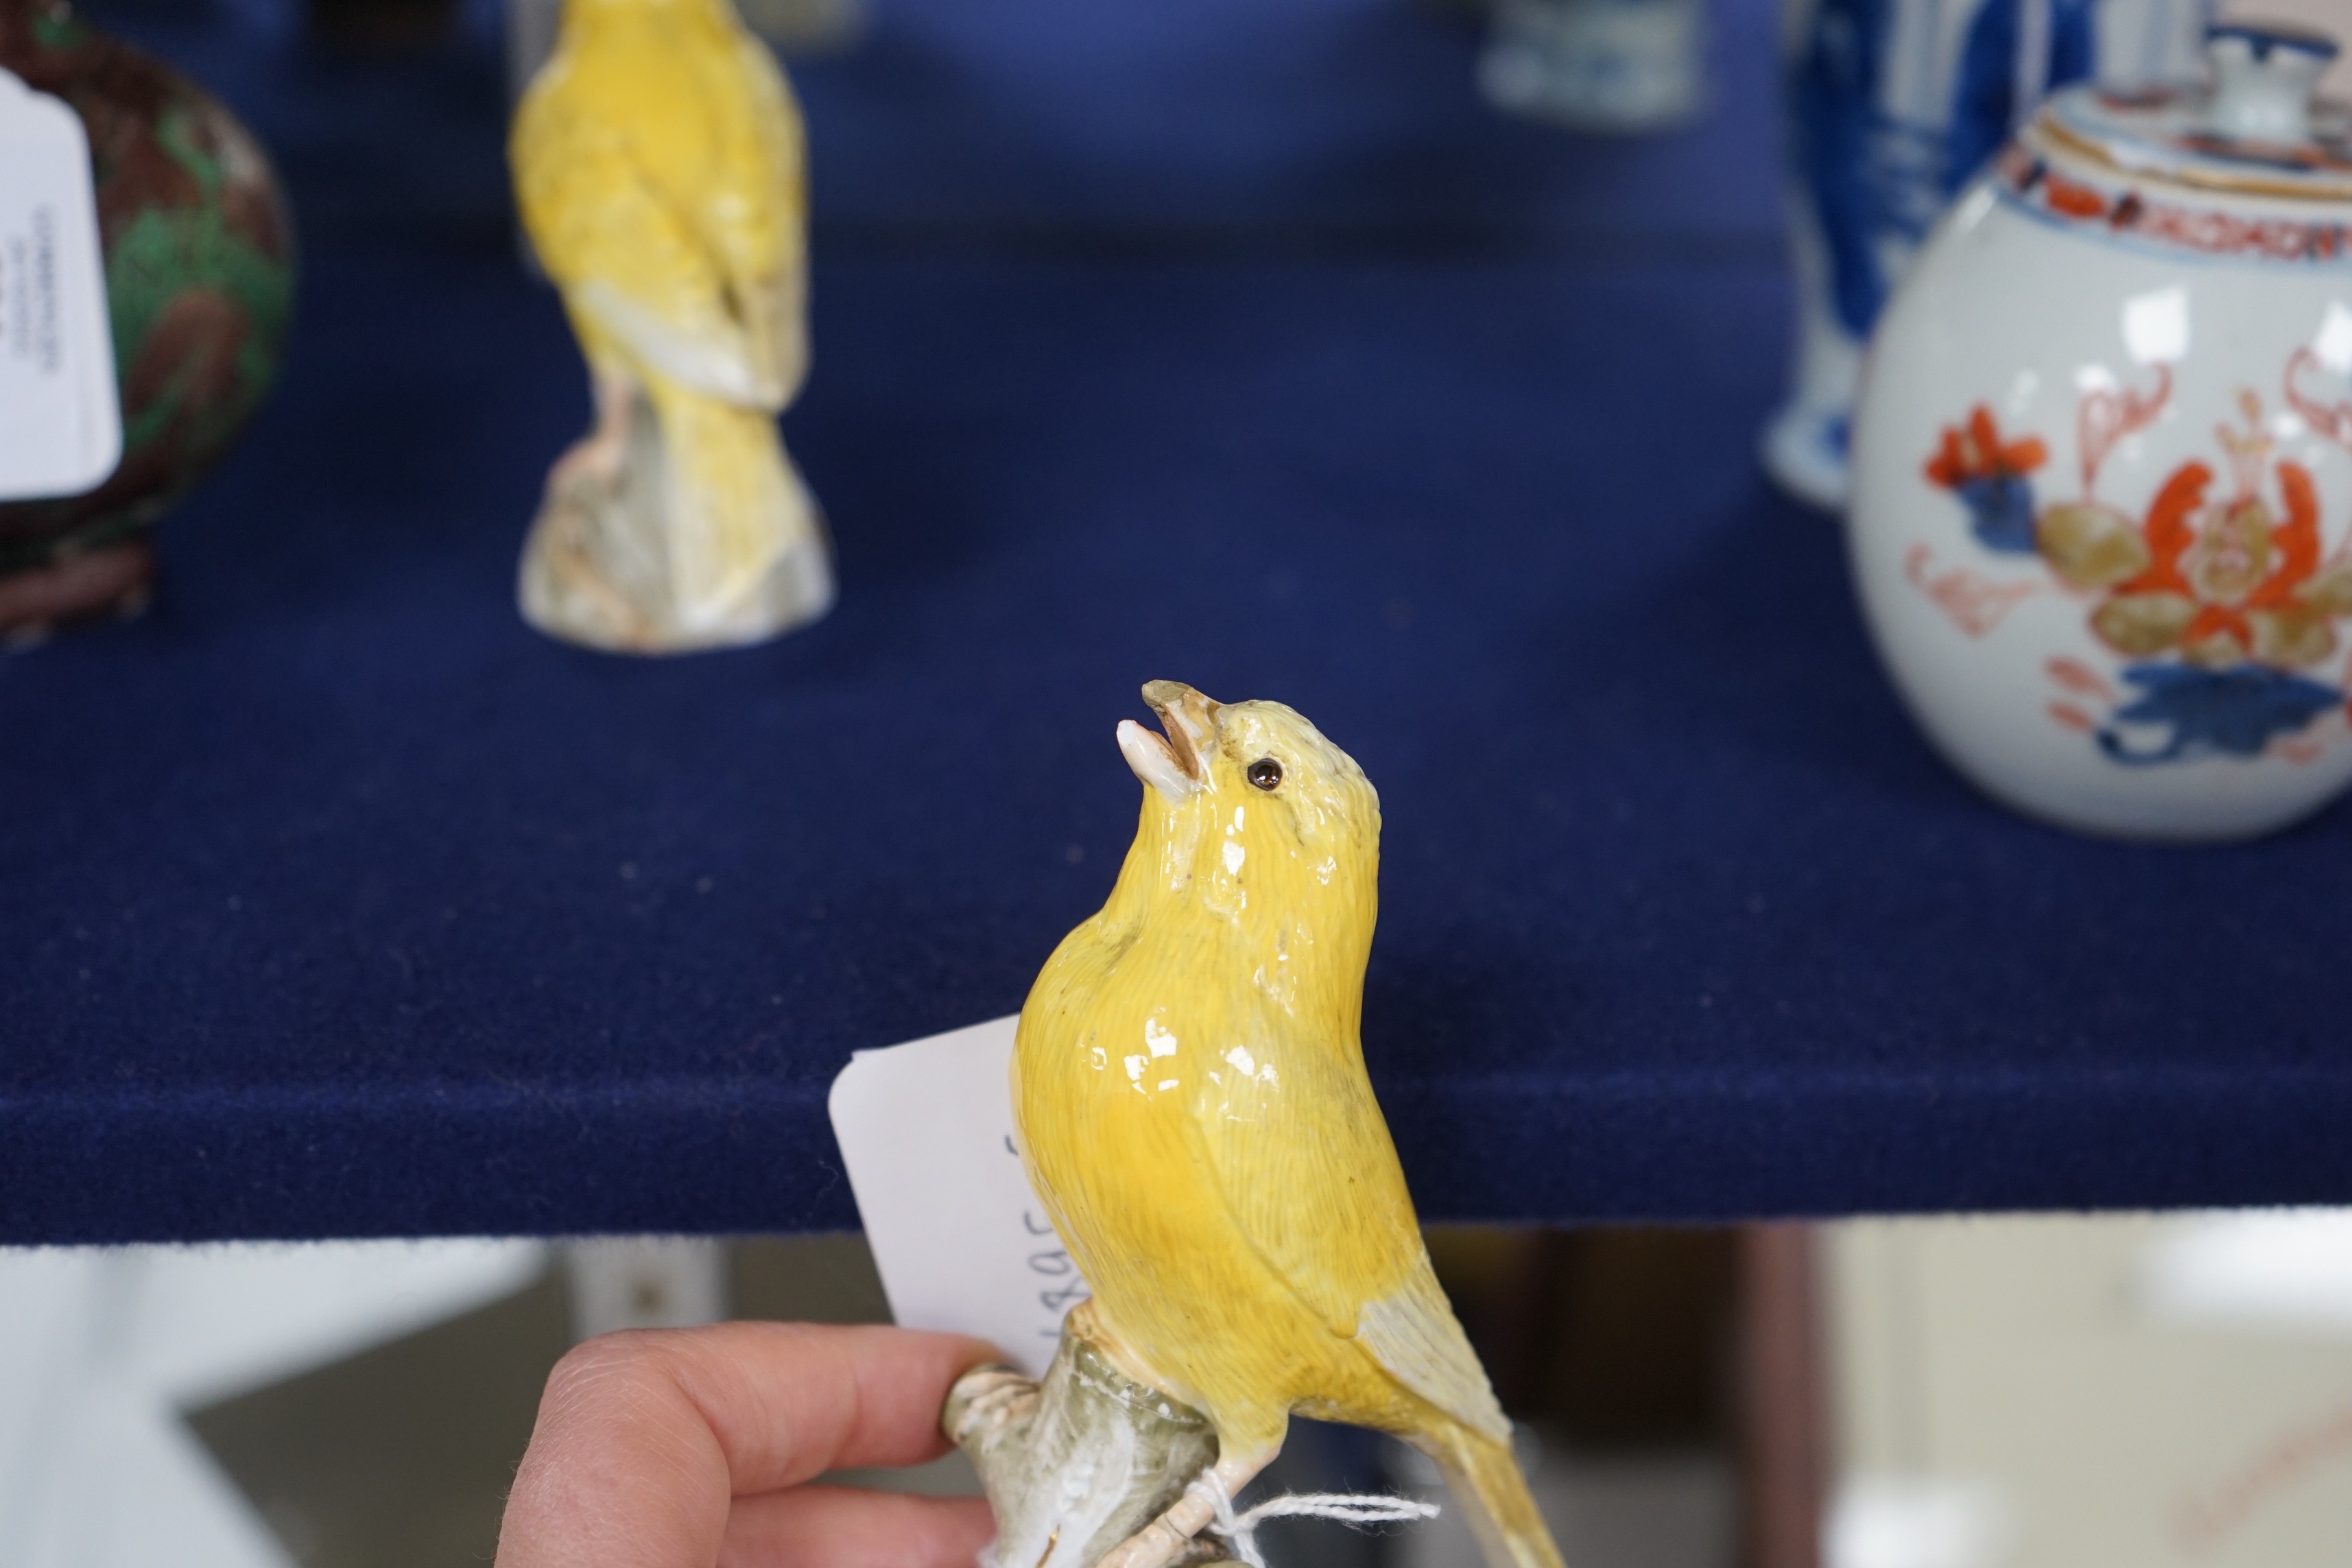 A pair of Meissen figures of canaries, 10cm tall